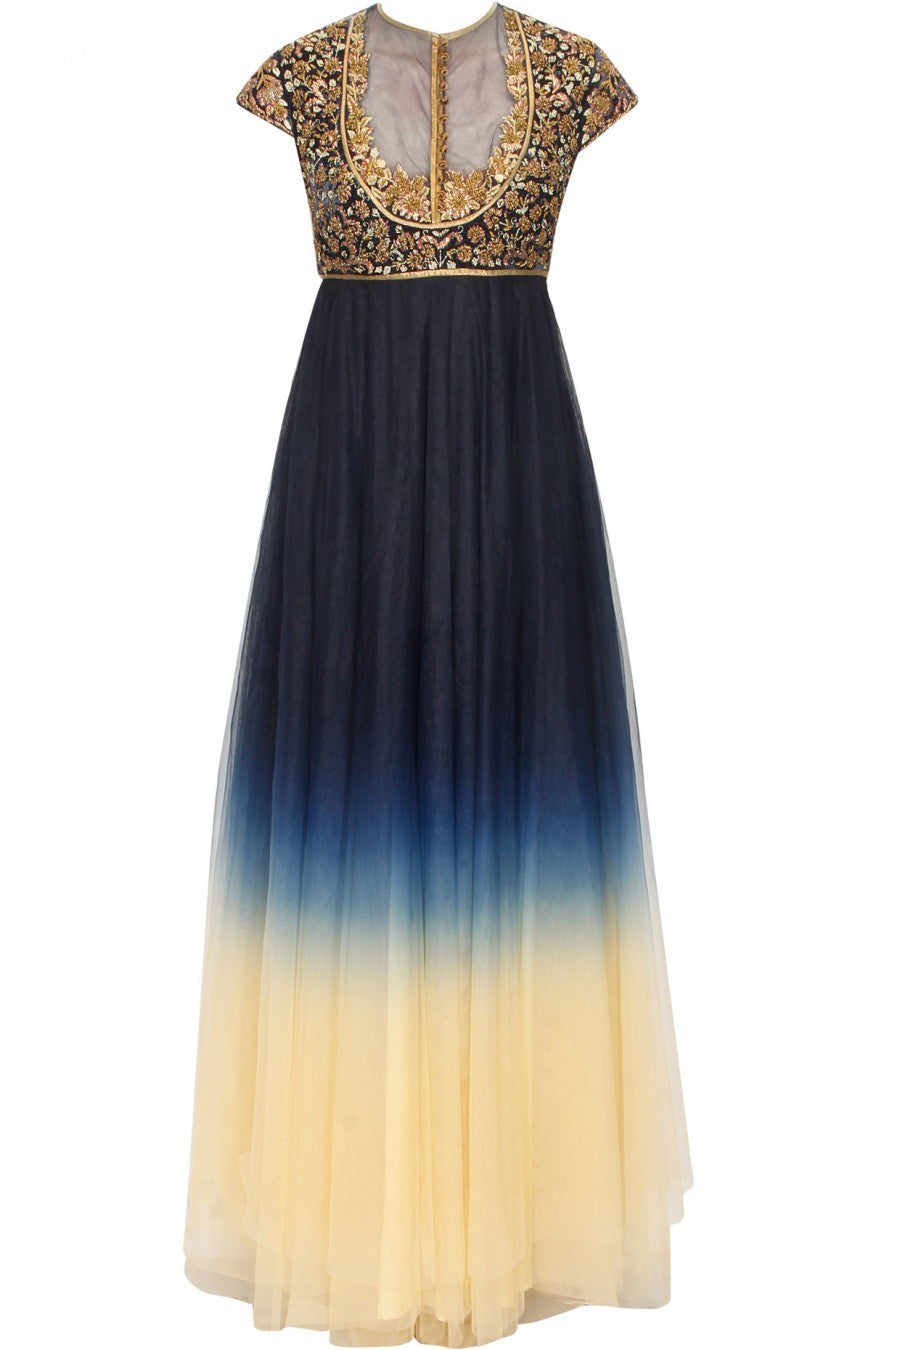 Navy Blue and Ivory shaded anarkali suit